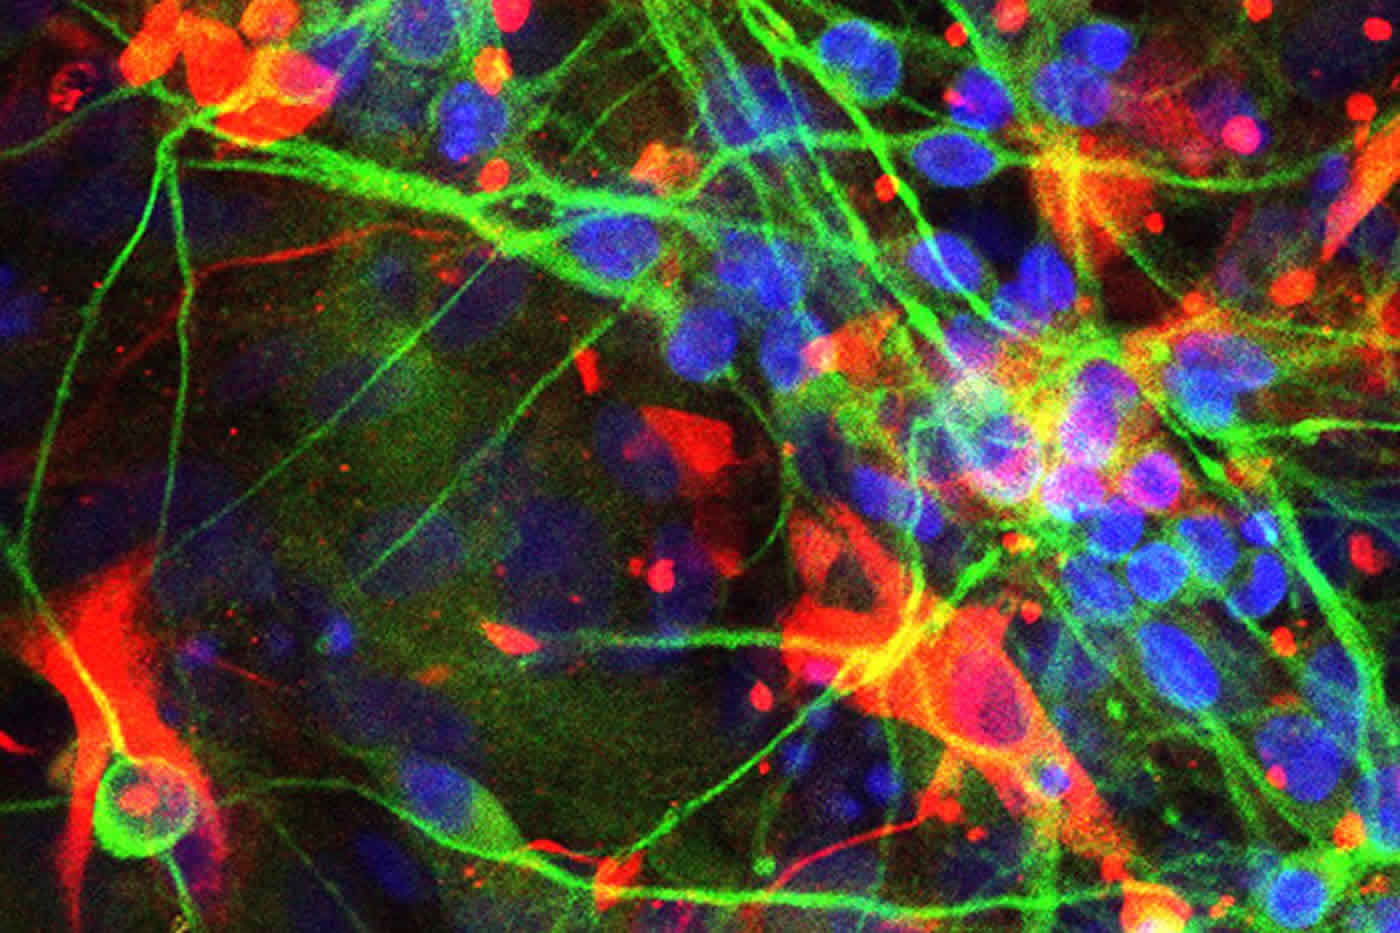 Image shows neurons and astrocytes.